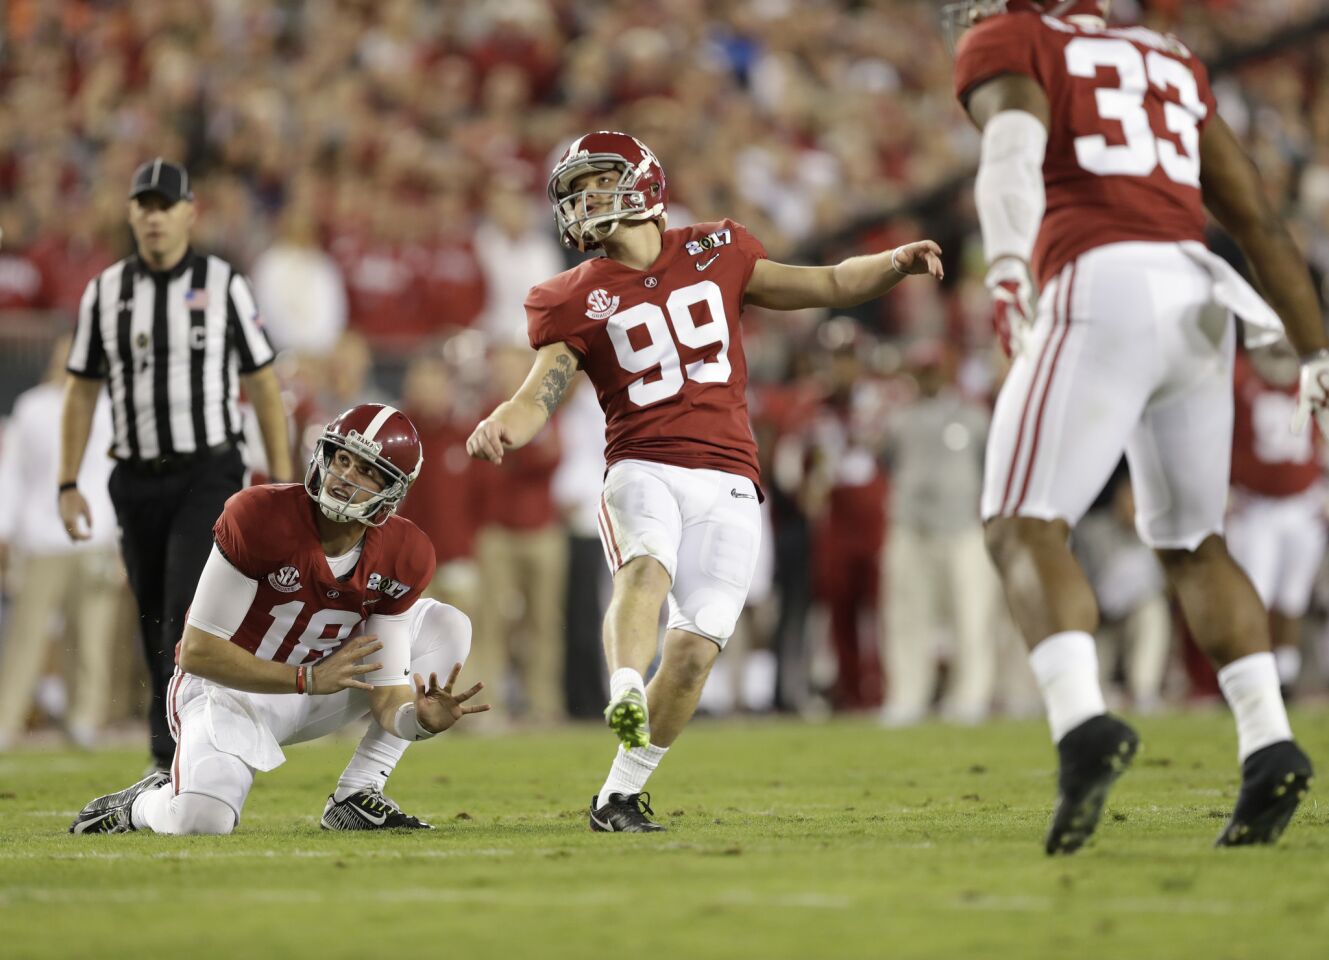 Alabama kicker Adam Griffith watches his 27-yard field goal that gave the Crimson Tide a 17-14 lead in the third quarter.